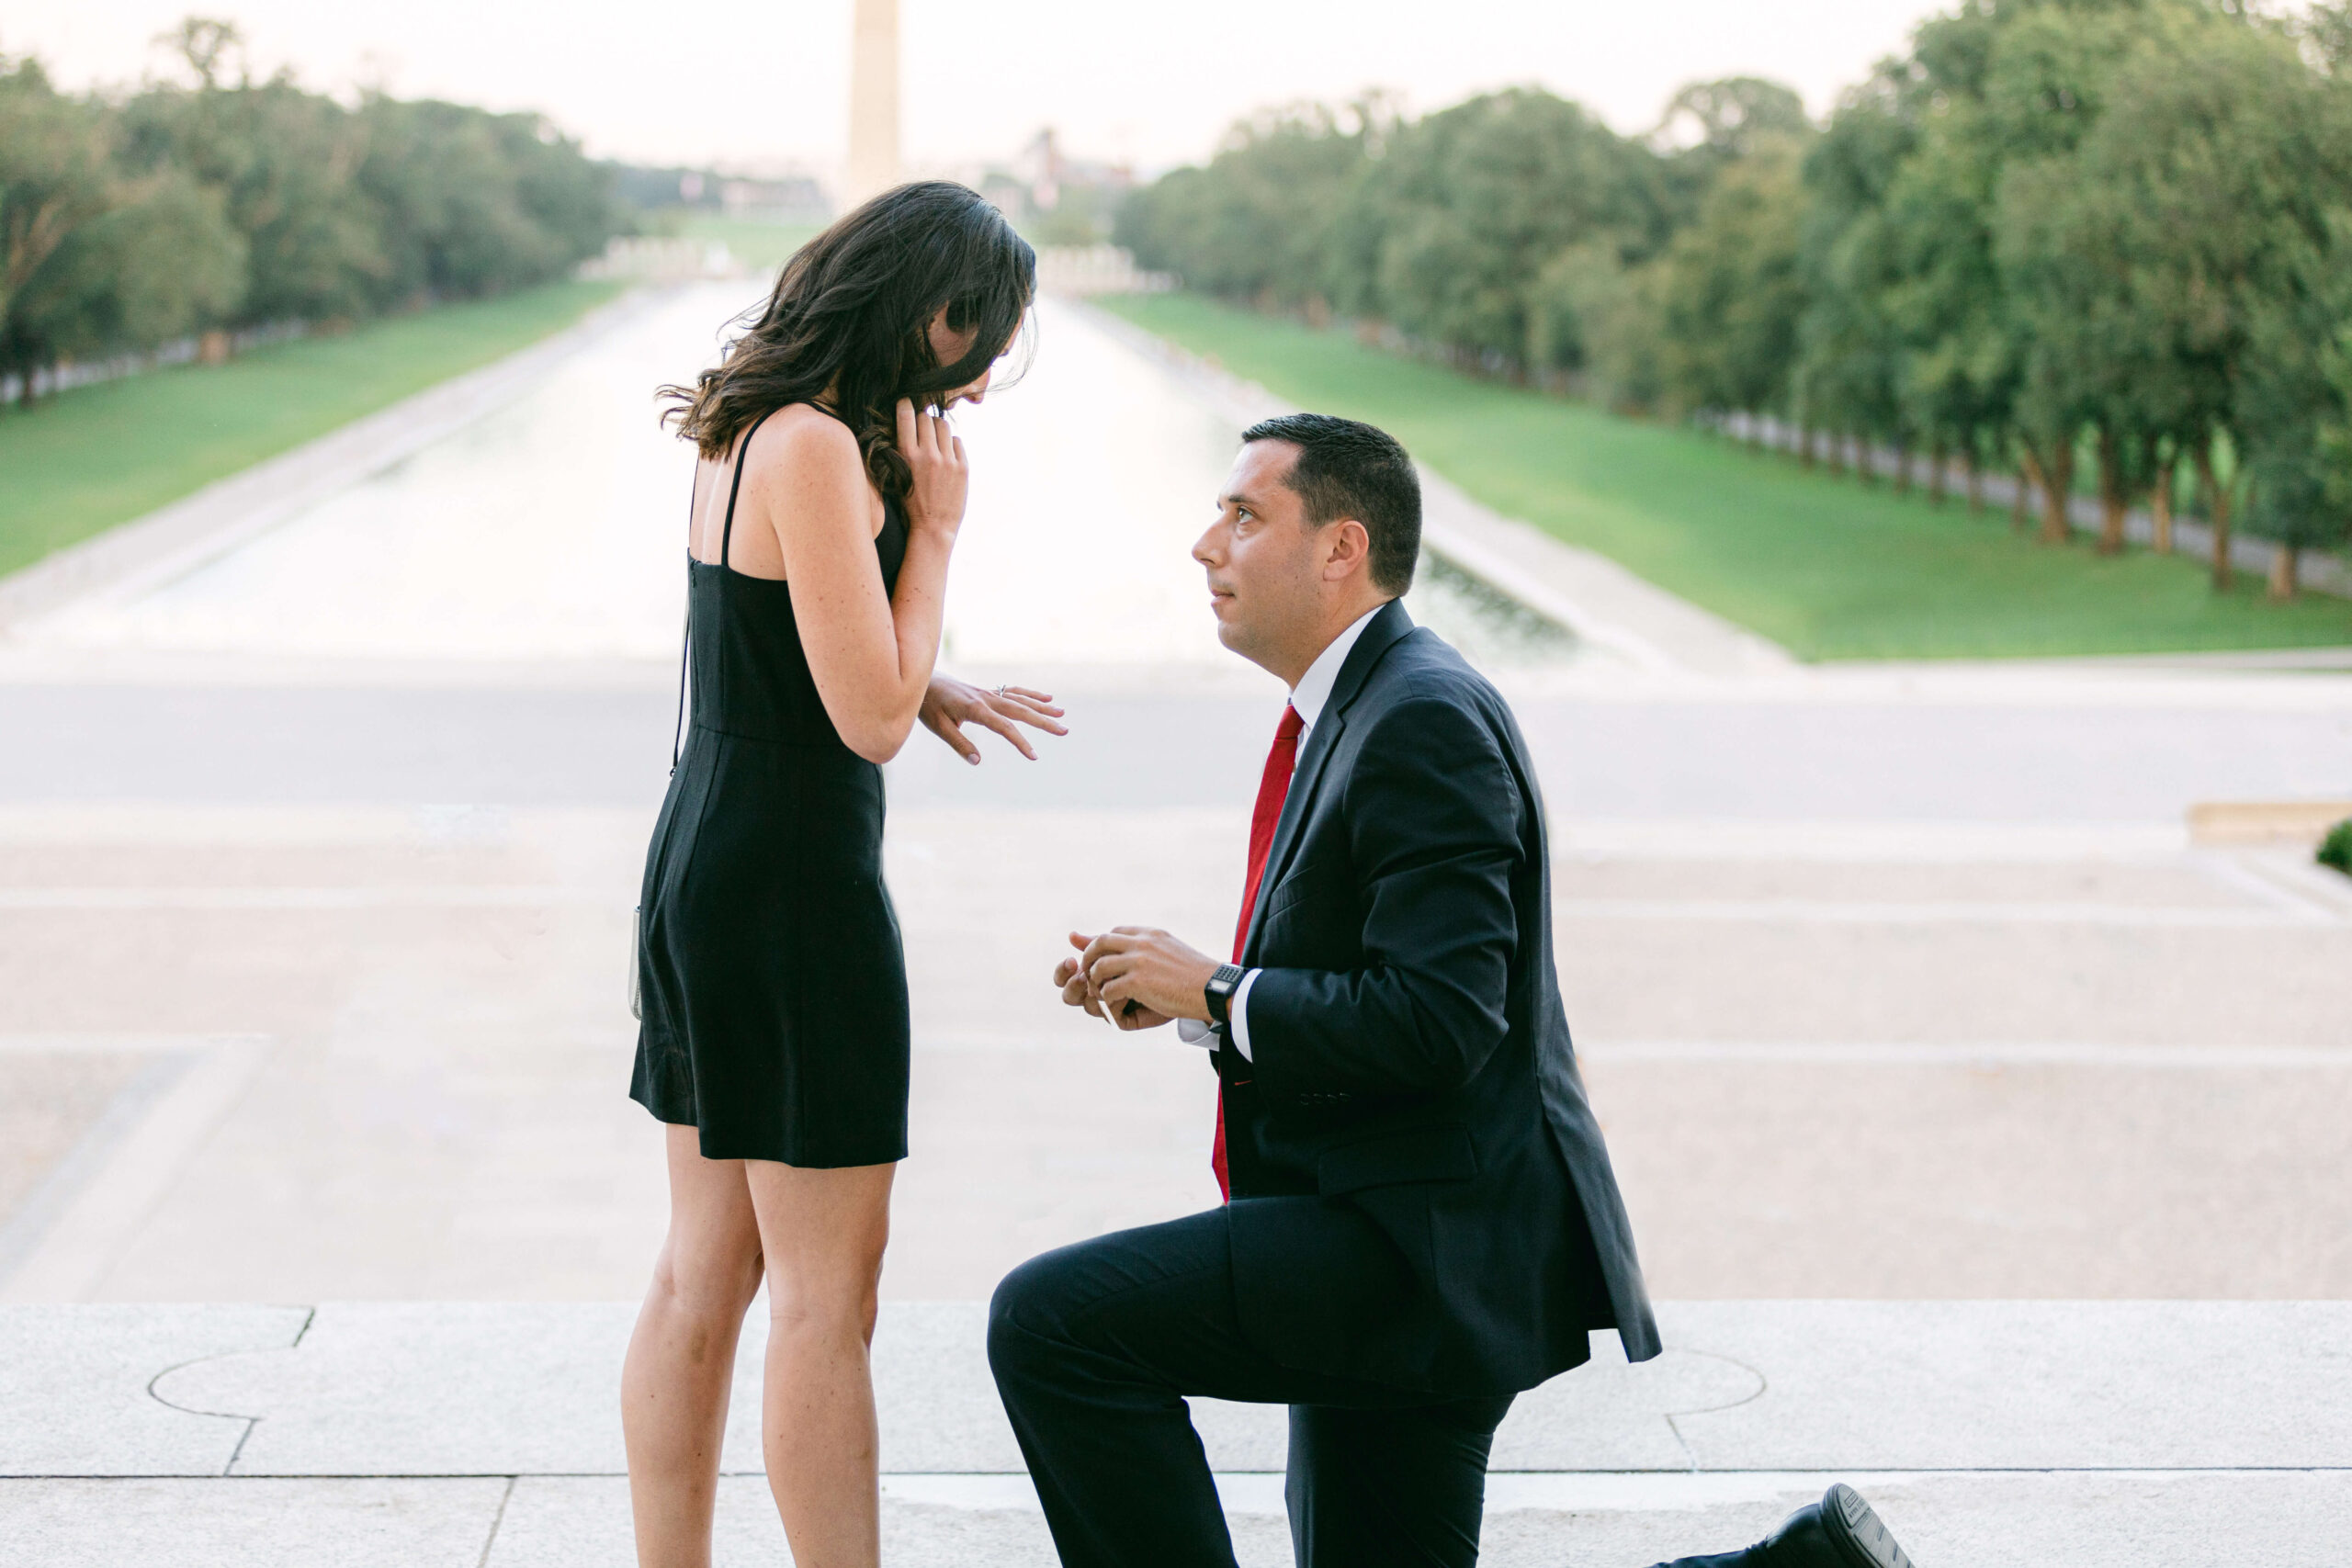 Engagement moment captured by Get Ready Photo at the Lincoln Memorial in Washington DC, with a man proposing on one knee to a surprised woman, reflecting the romantic spirit of the city